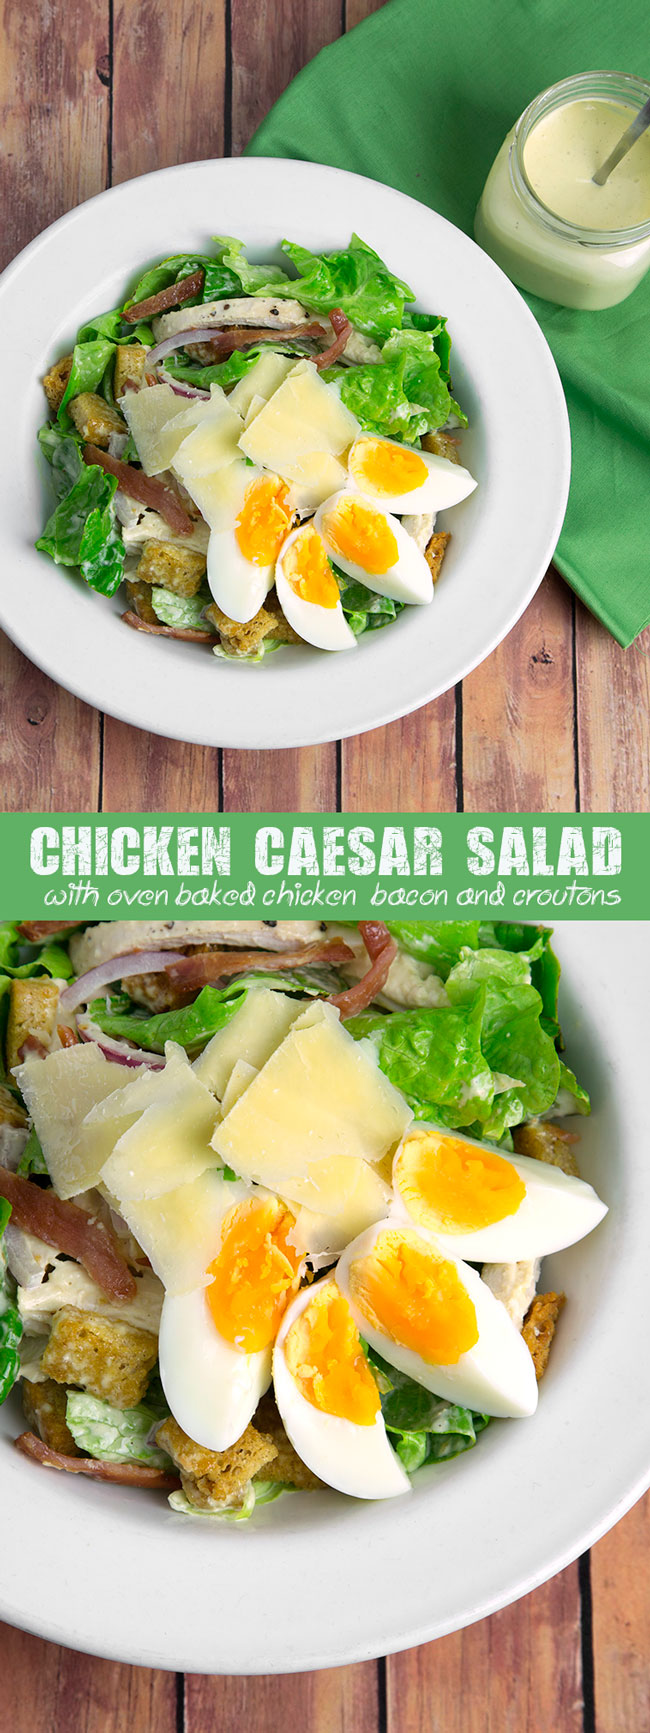 Chicken Caesar Salad with Oven Baked Chicken Bacon & Garlic Croutons @OmNomAlly